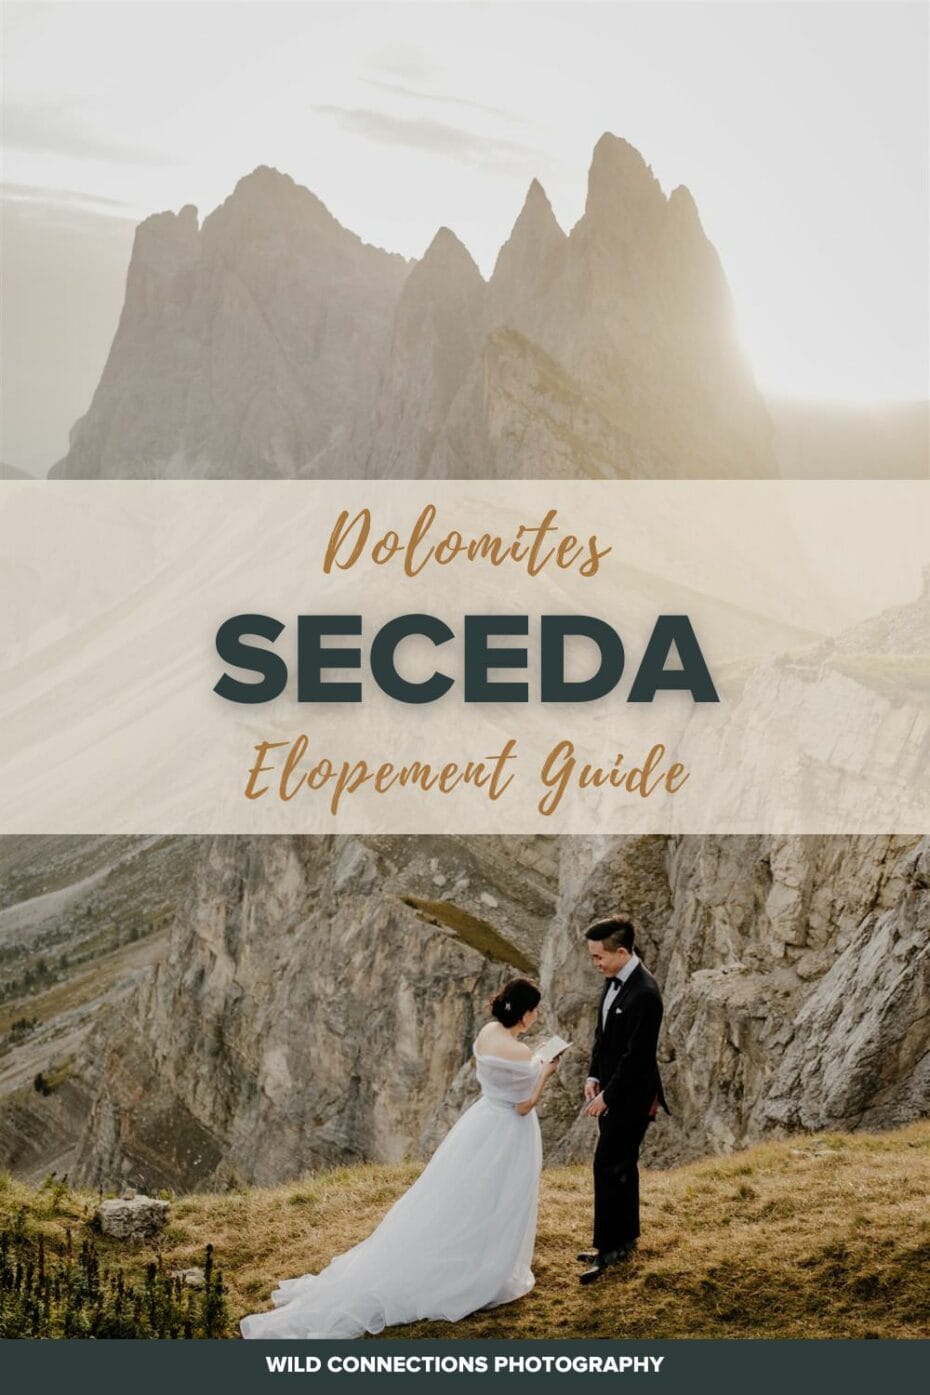 How to elope at Seceda - a local's advice